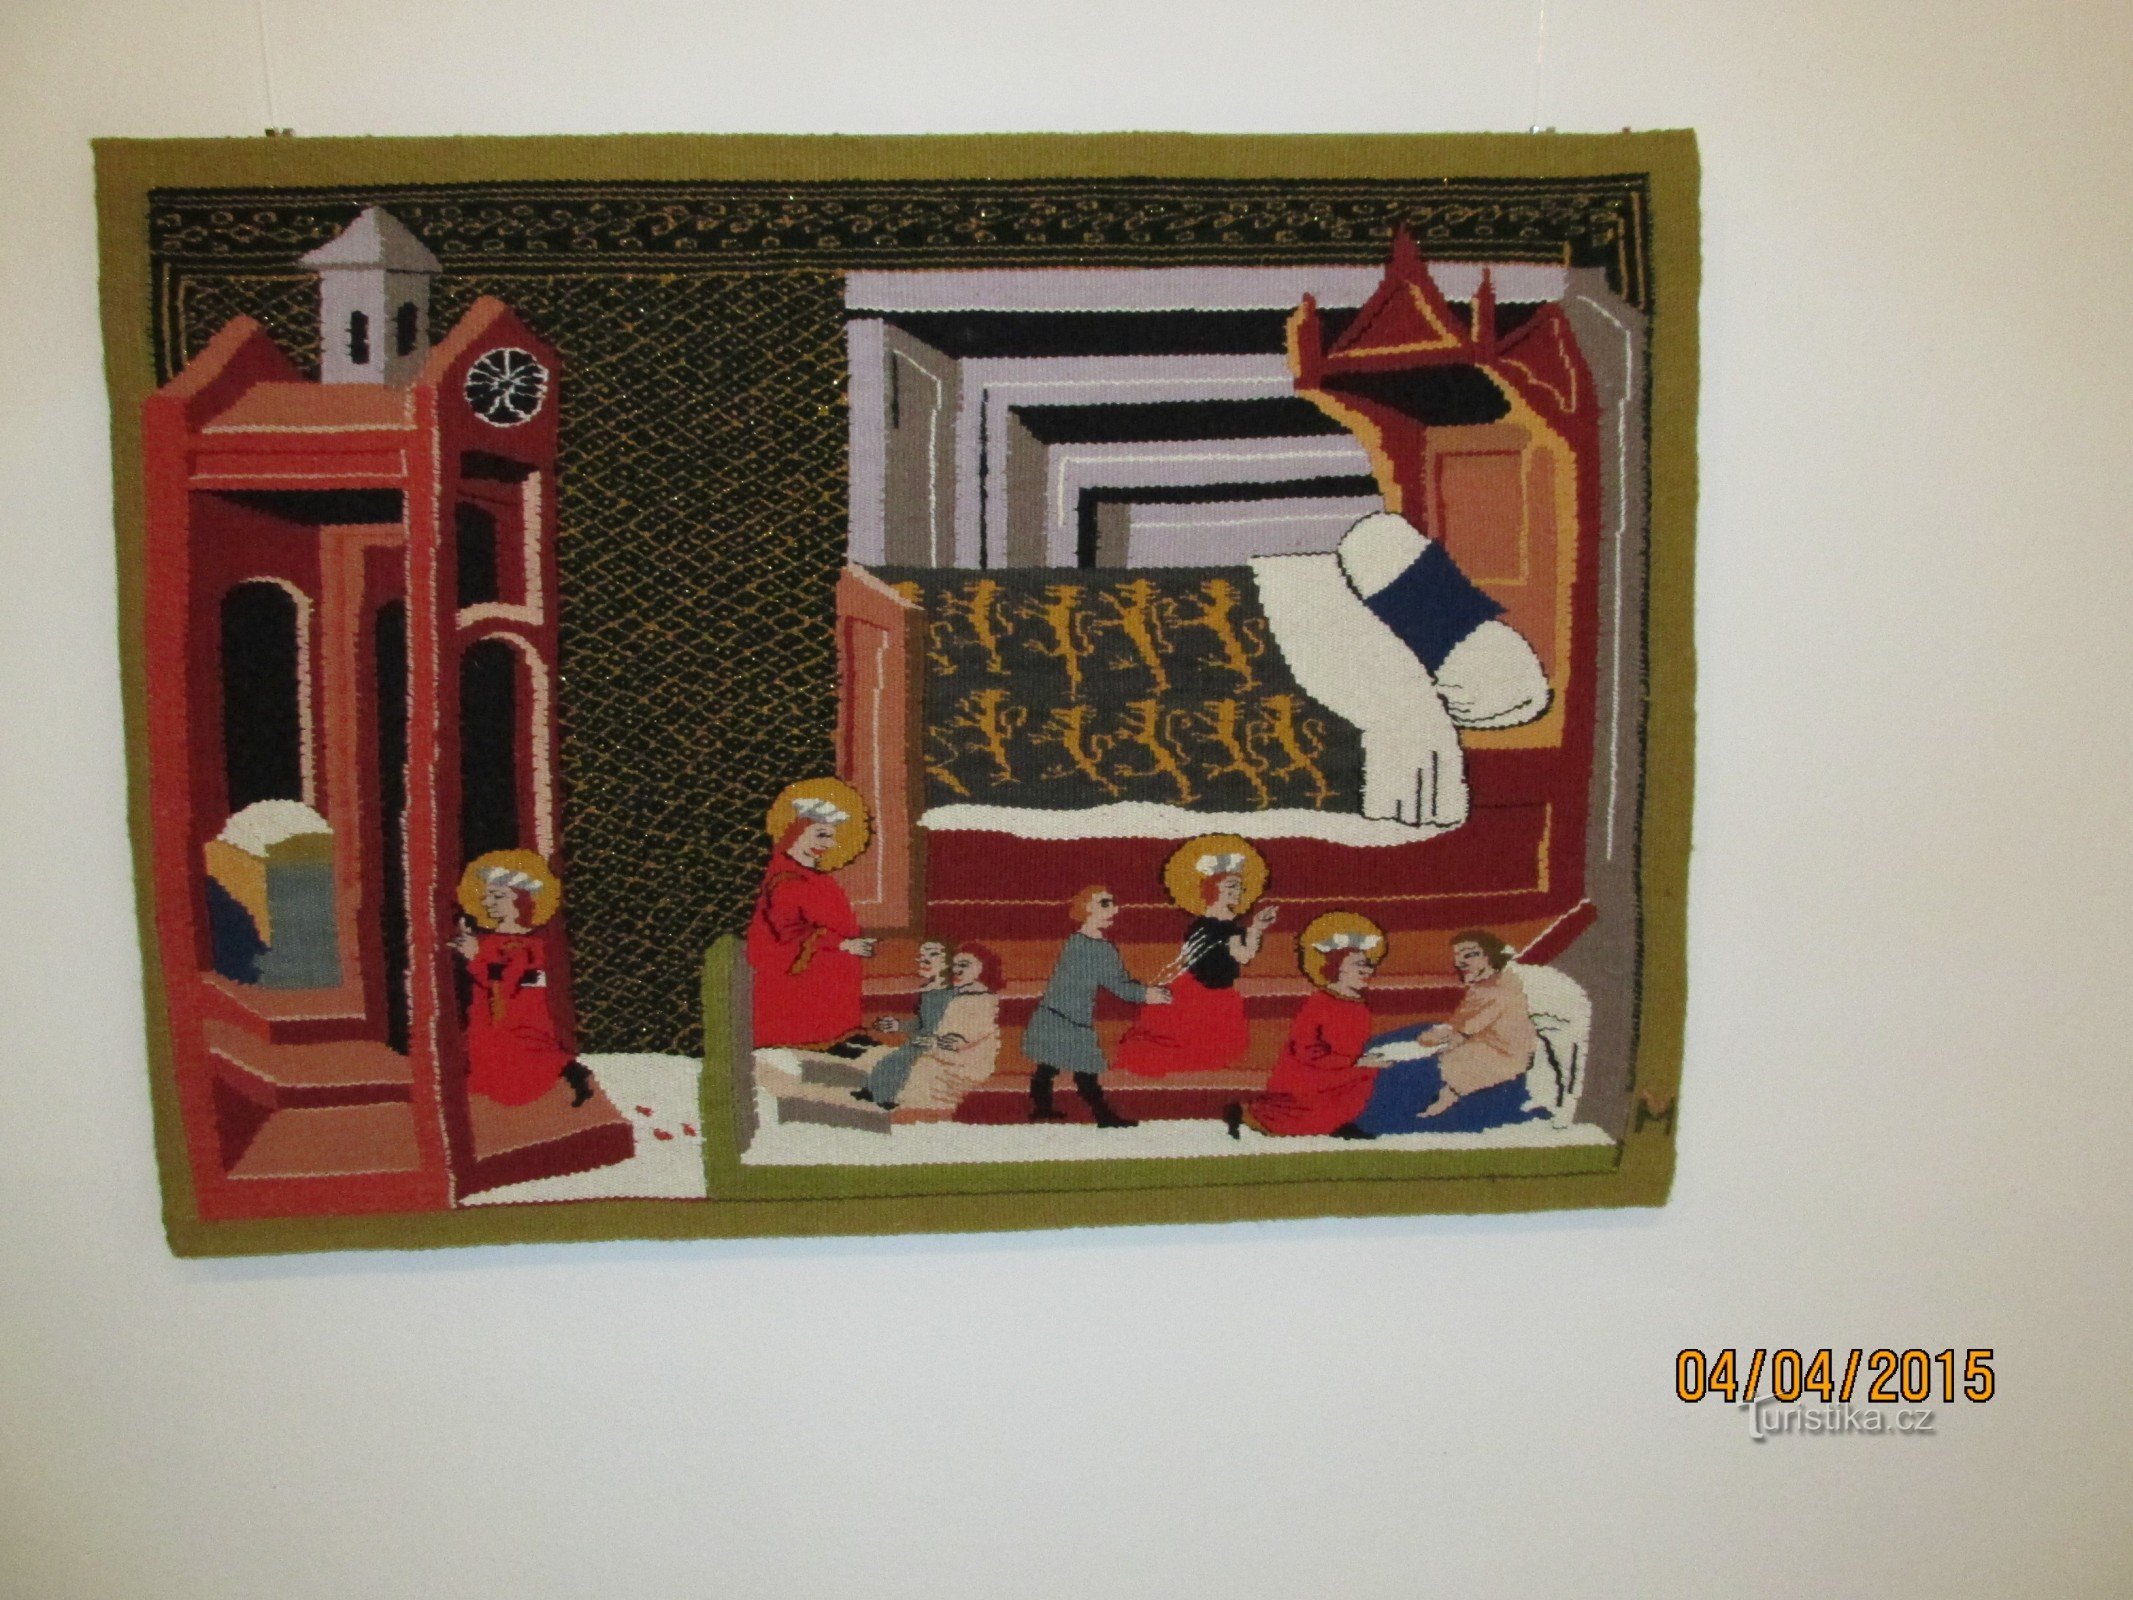 Dalimil's Chronicle: Tapestry Replica of the Paris Fragment